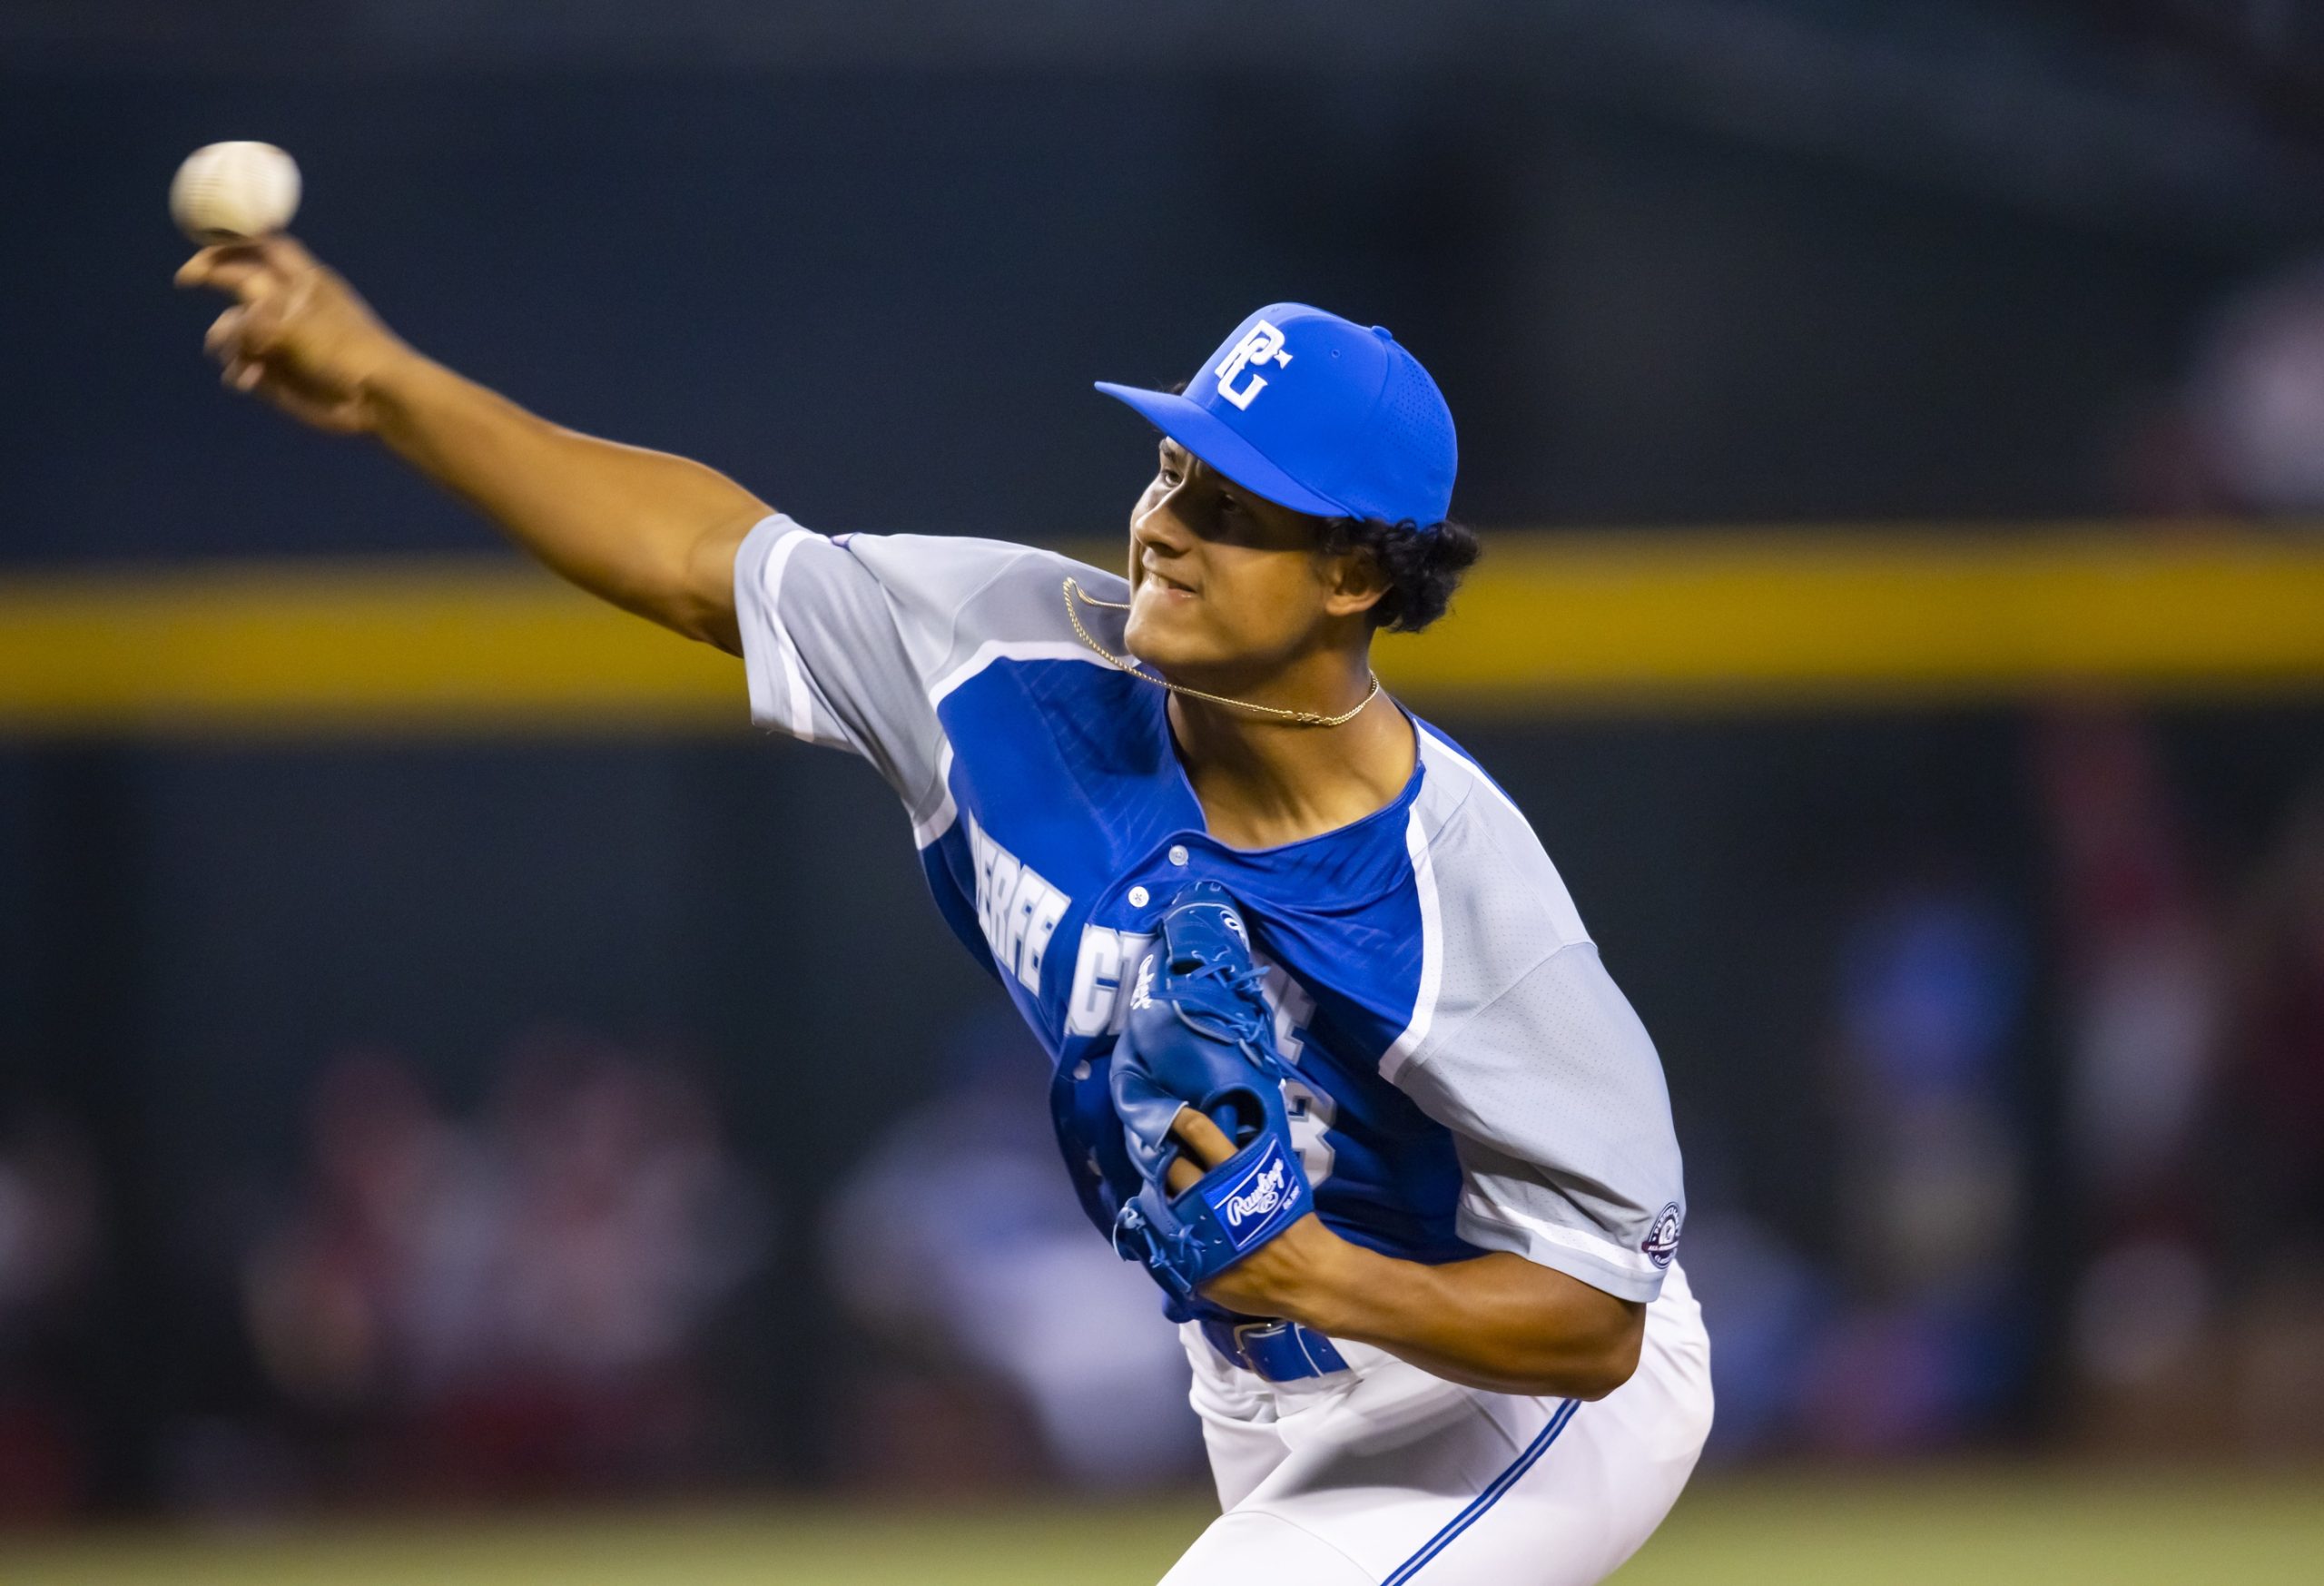 Pitcher? Hitter? Both? MLB draft marked by two-way players